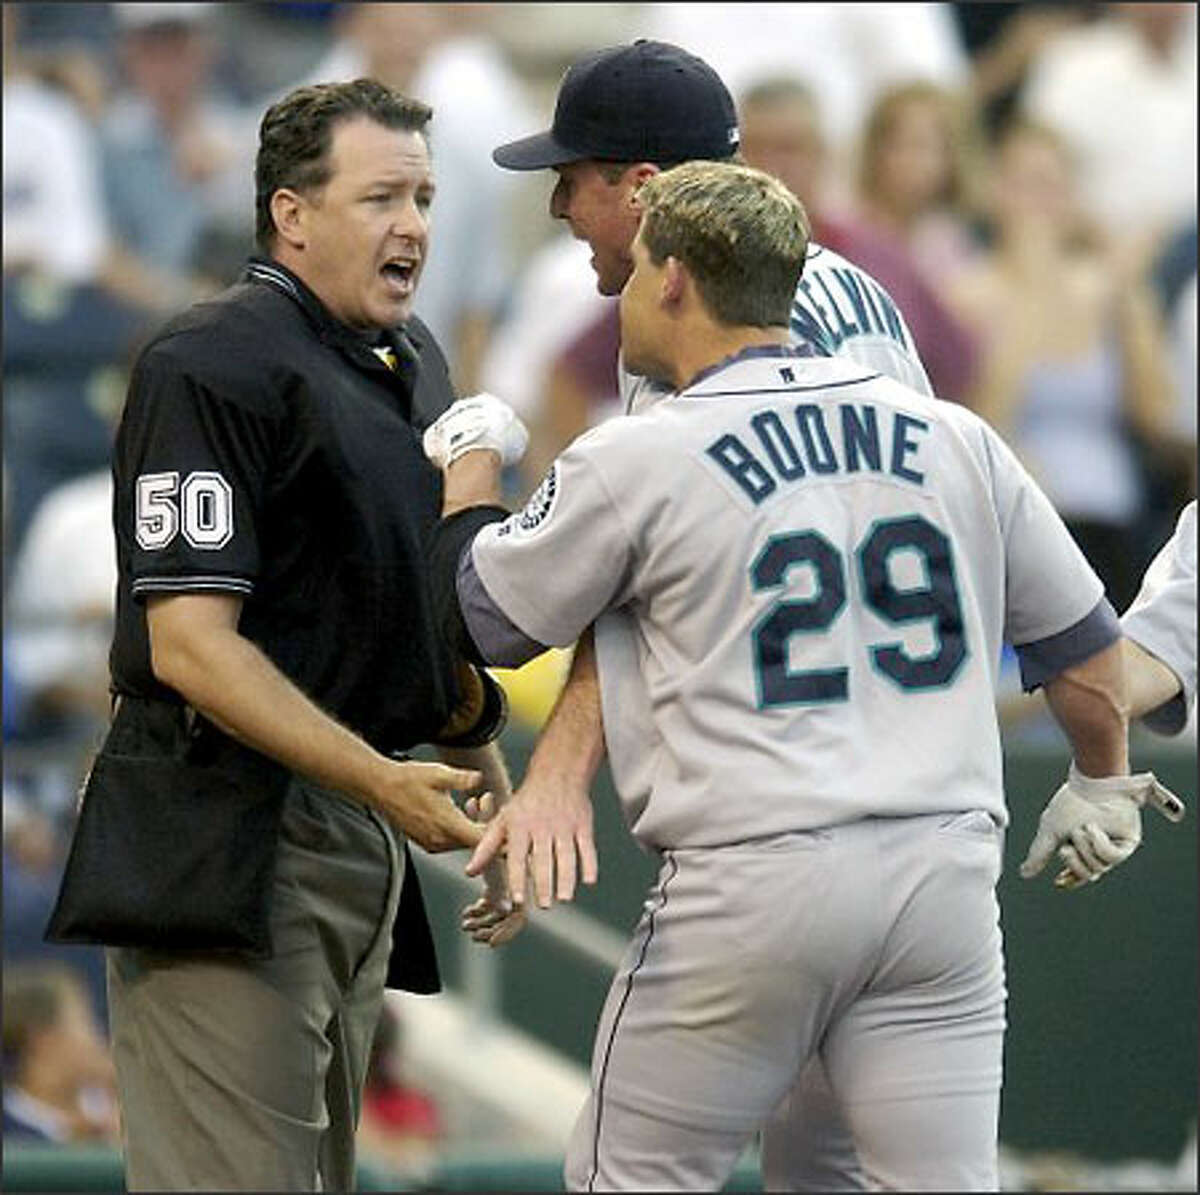 Mariners second baseman Bret Boone (29) and manager Bob Melvin argue with umpire Paul Emmel after Boone was ejected in the first inning against the Kansas City Royals. Boone, who struck out to end the inning, was ejected after he threw his bat and helmet while leaving the plate.